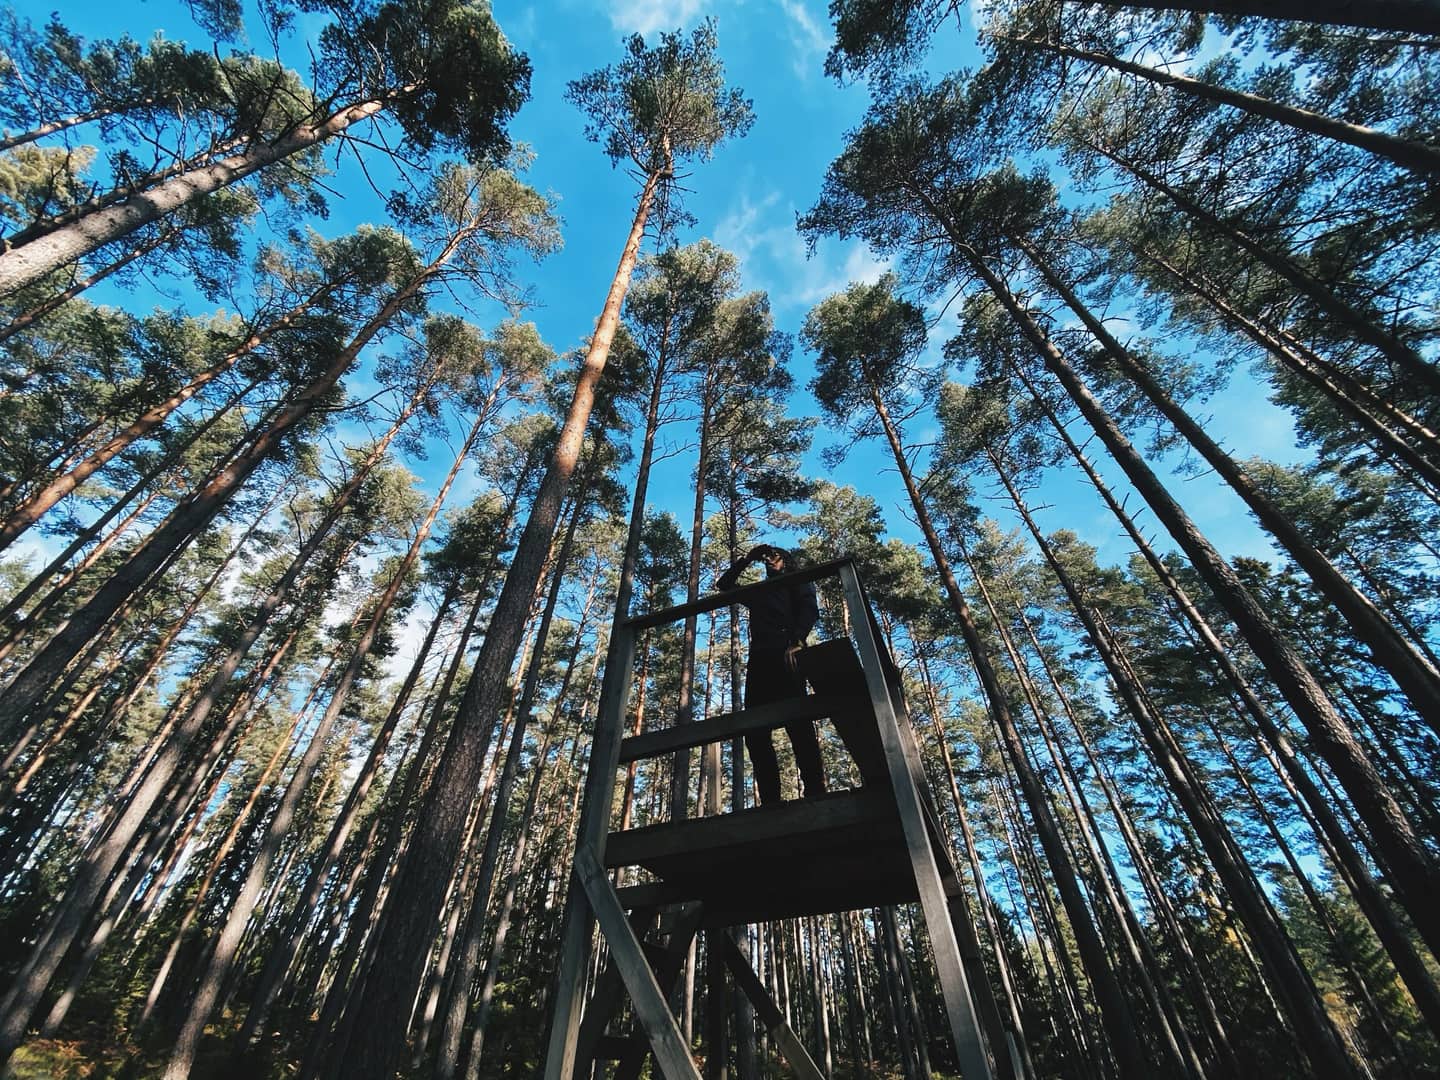 Man up on a hunting tower looking out over the forest. Pine trees grow tall around him.